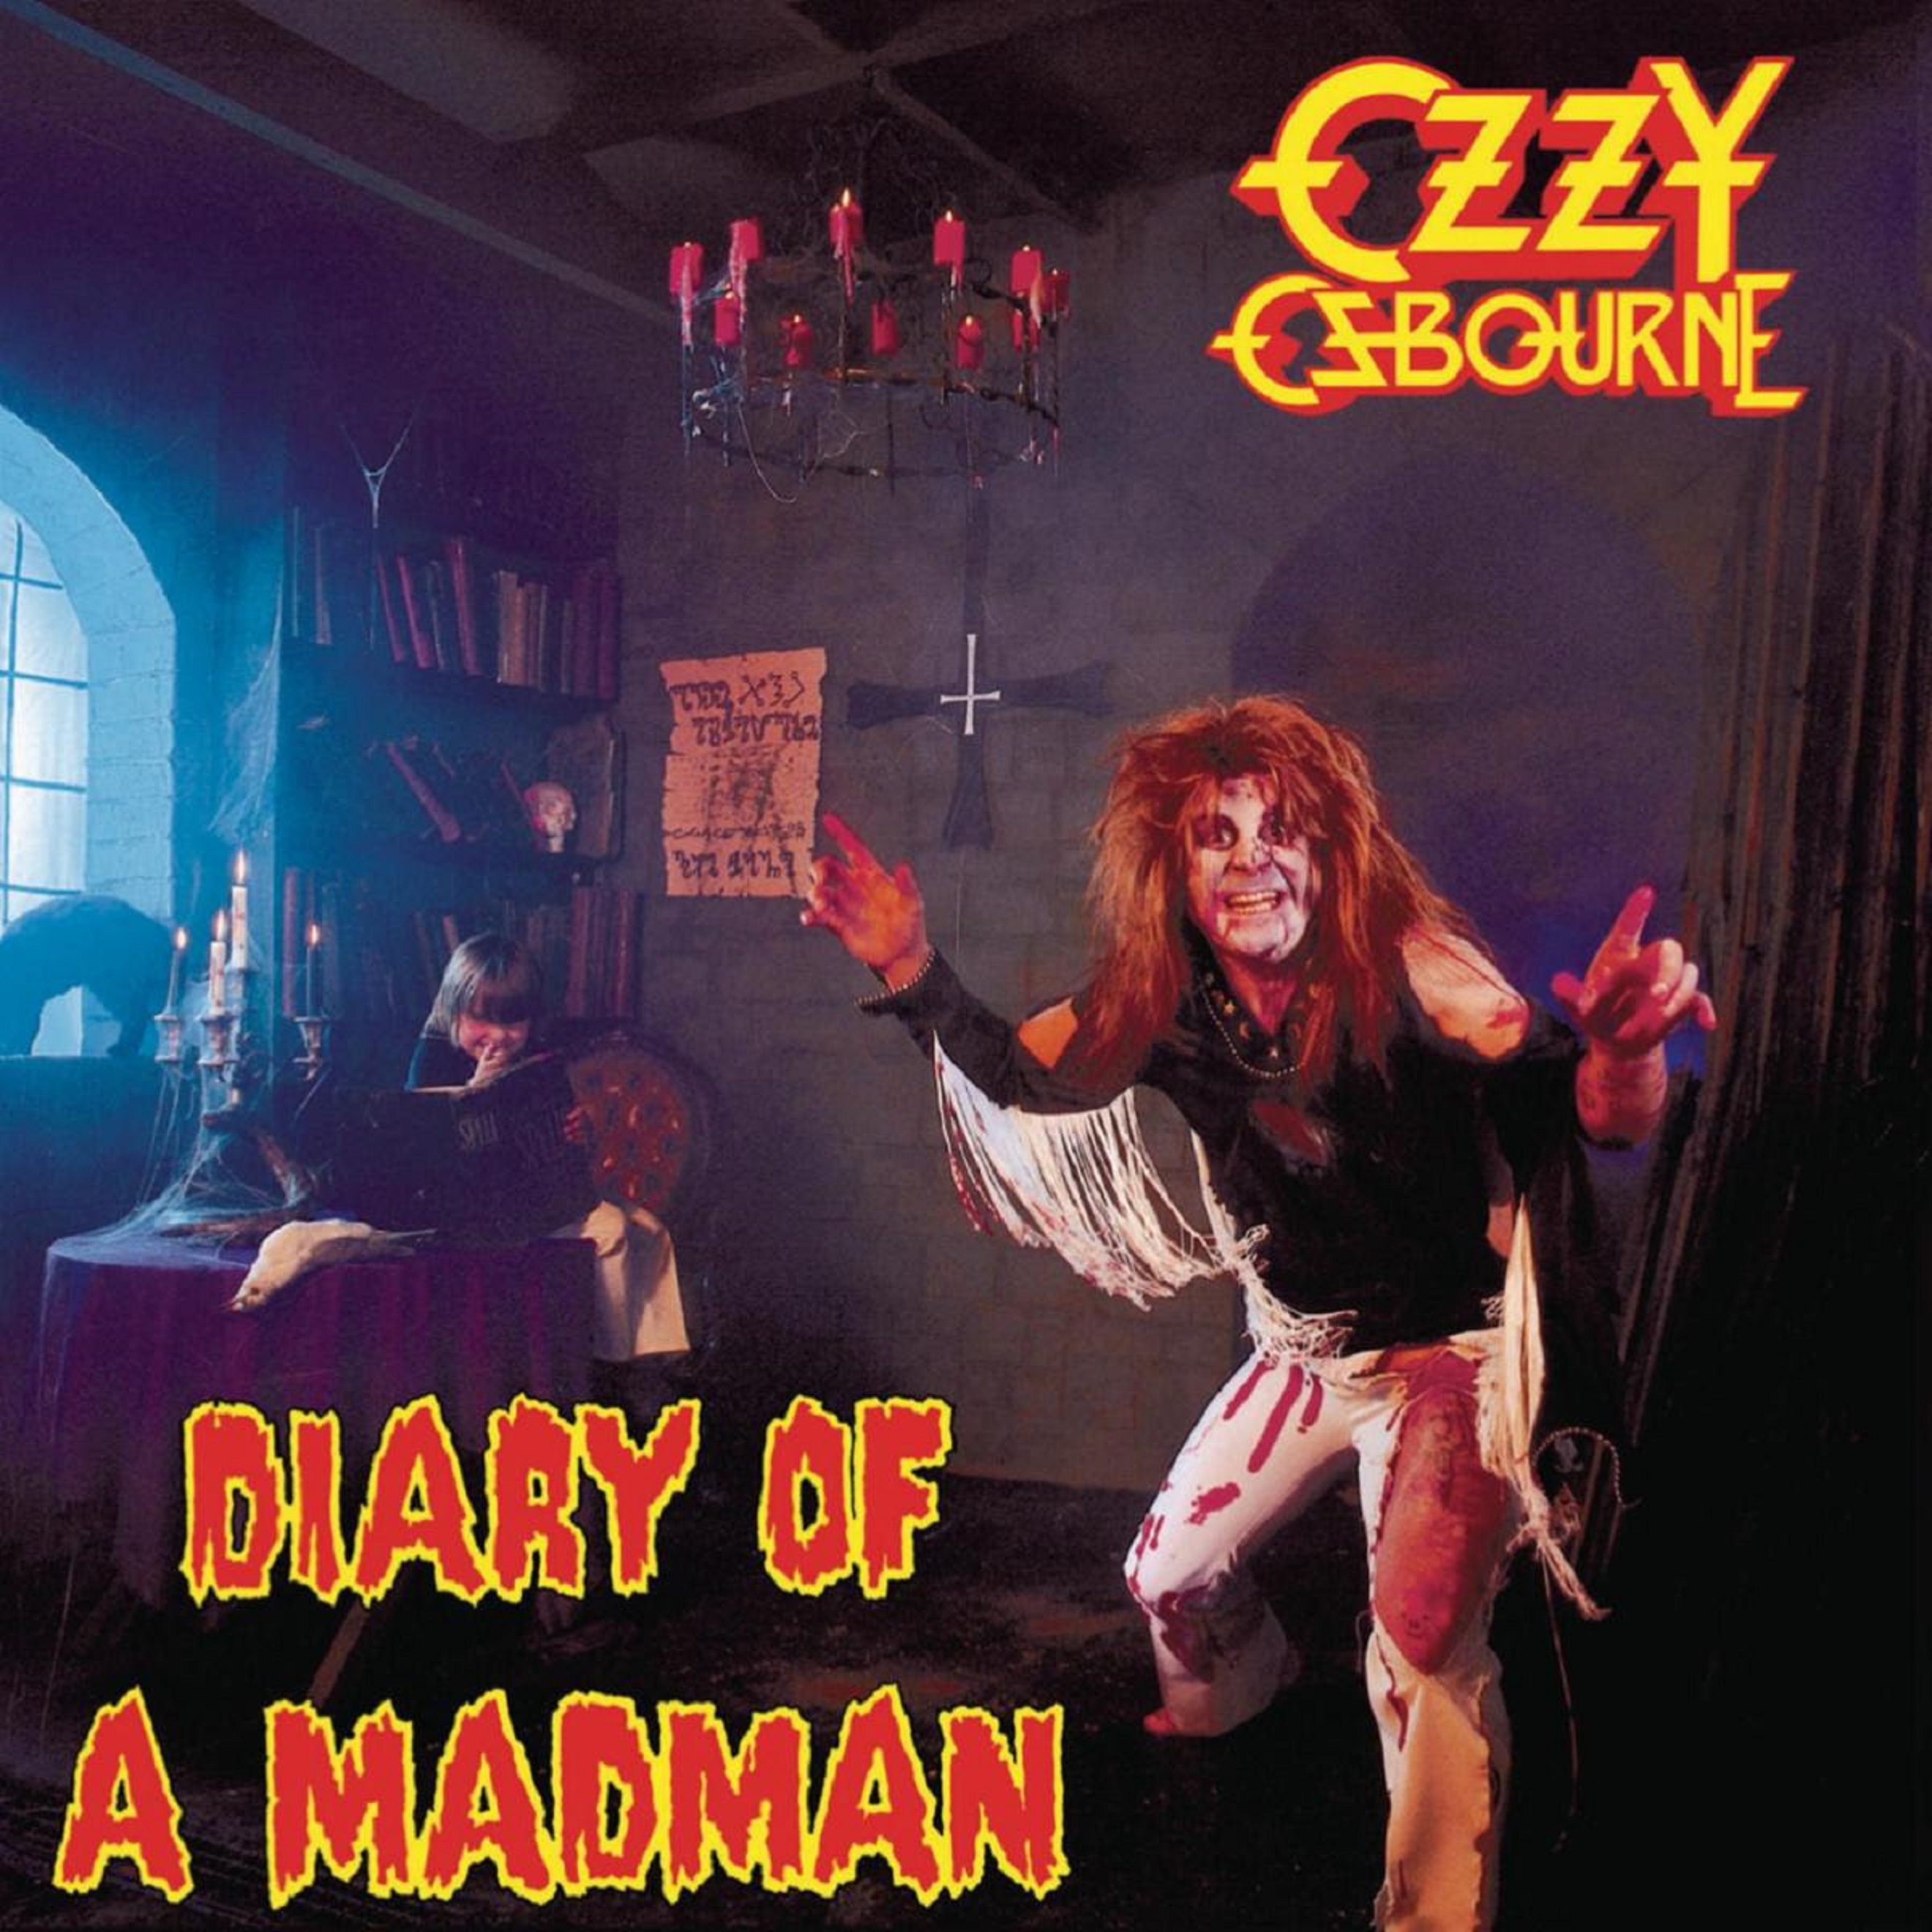 OZZY OSBOURNE’S ‘Diary Of A Madman’s' 40th Anniversary Expanded Digital Edition Due Out November 5